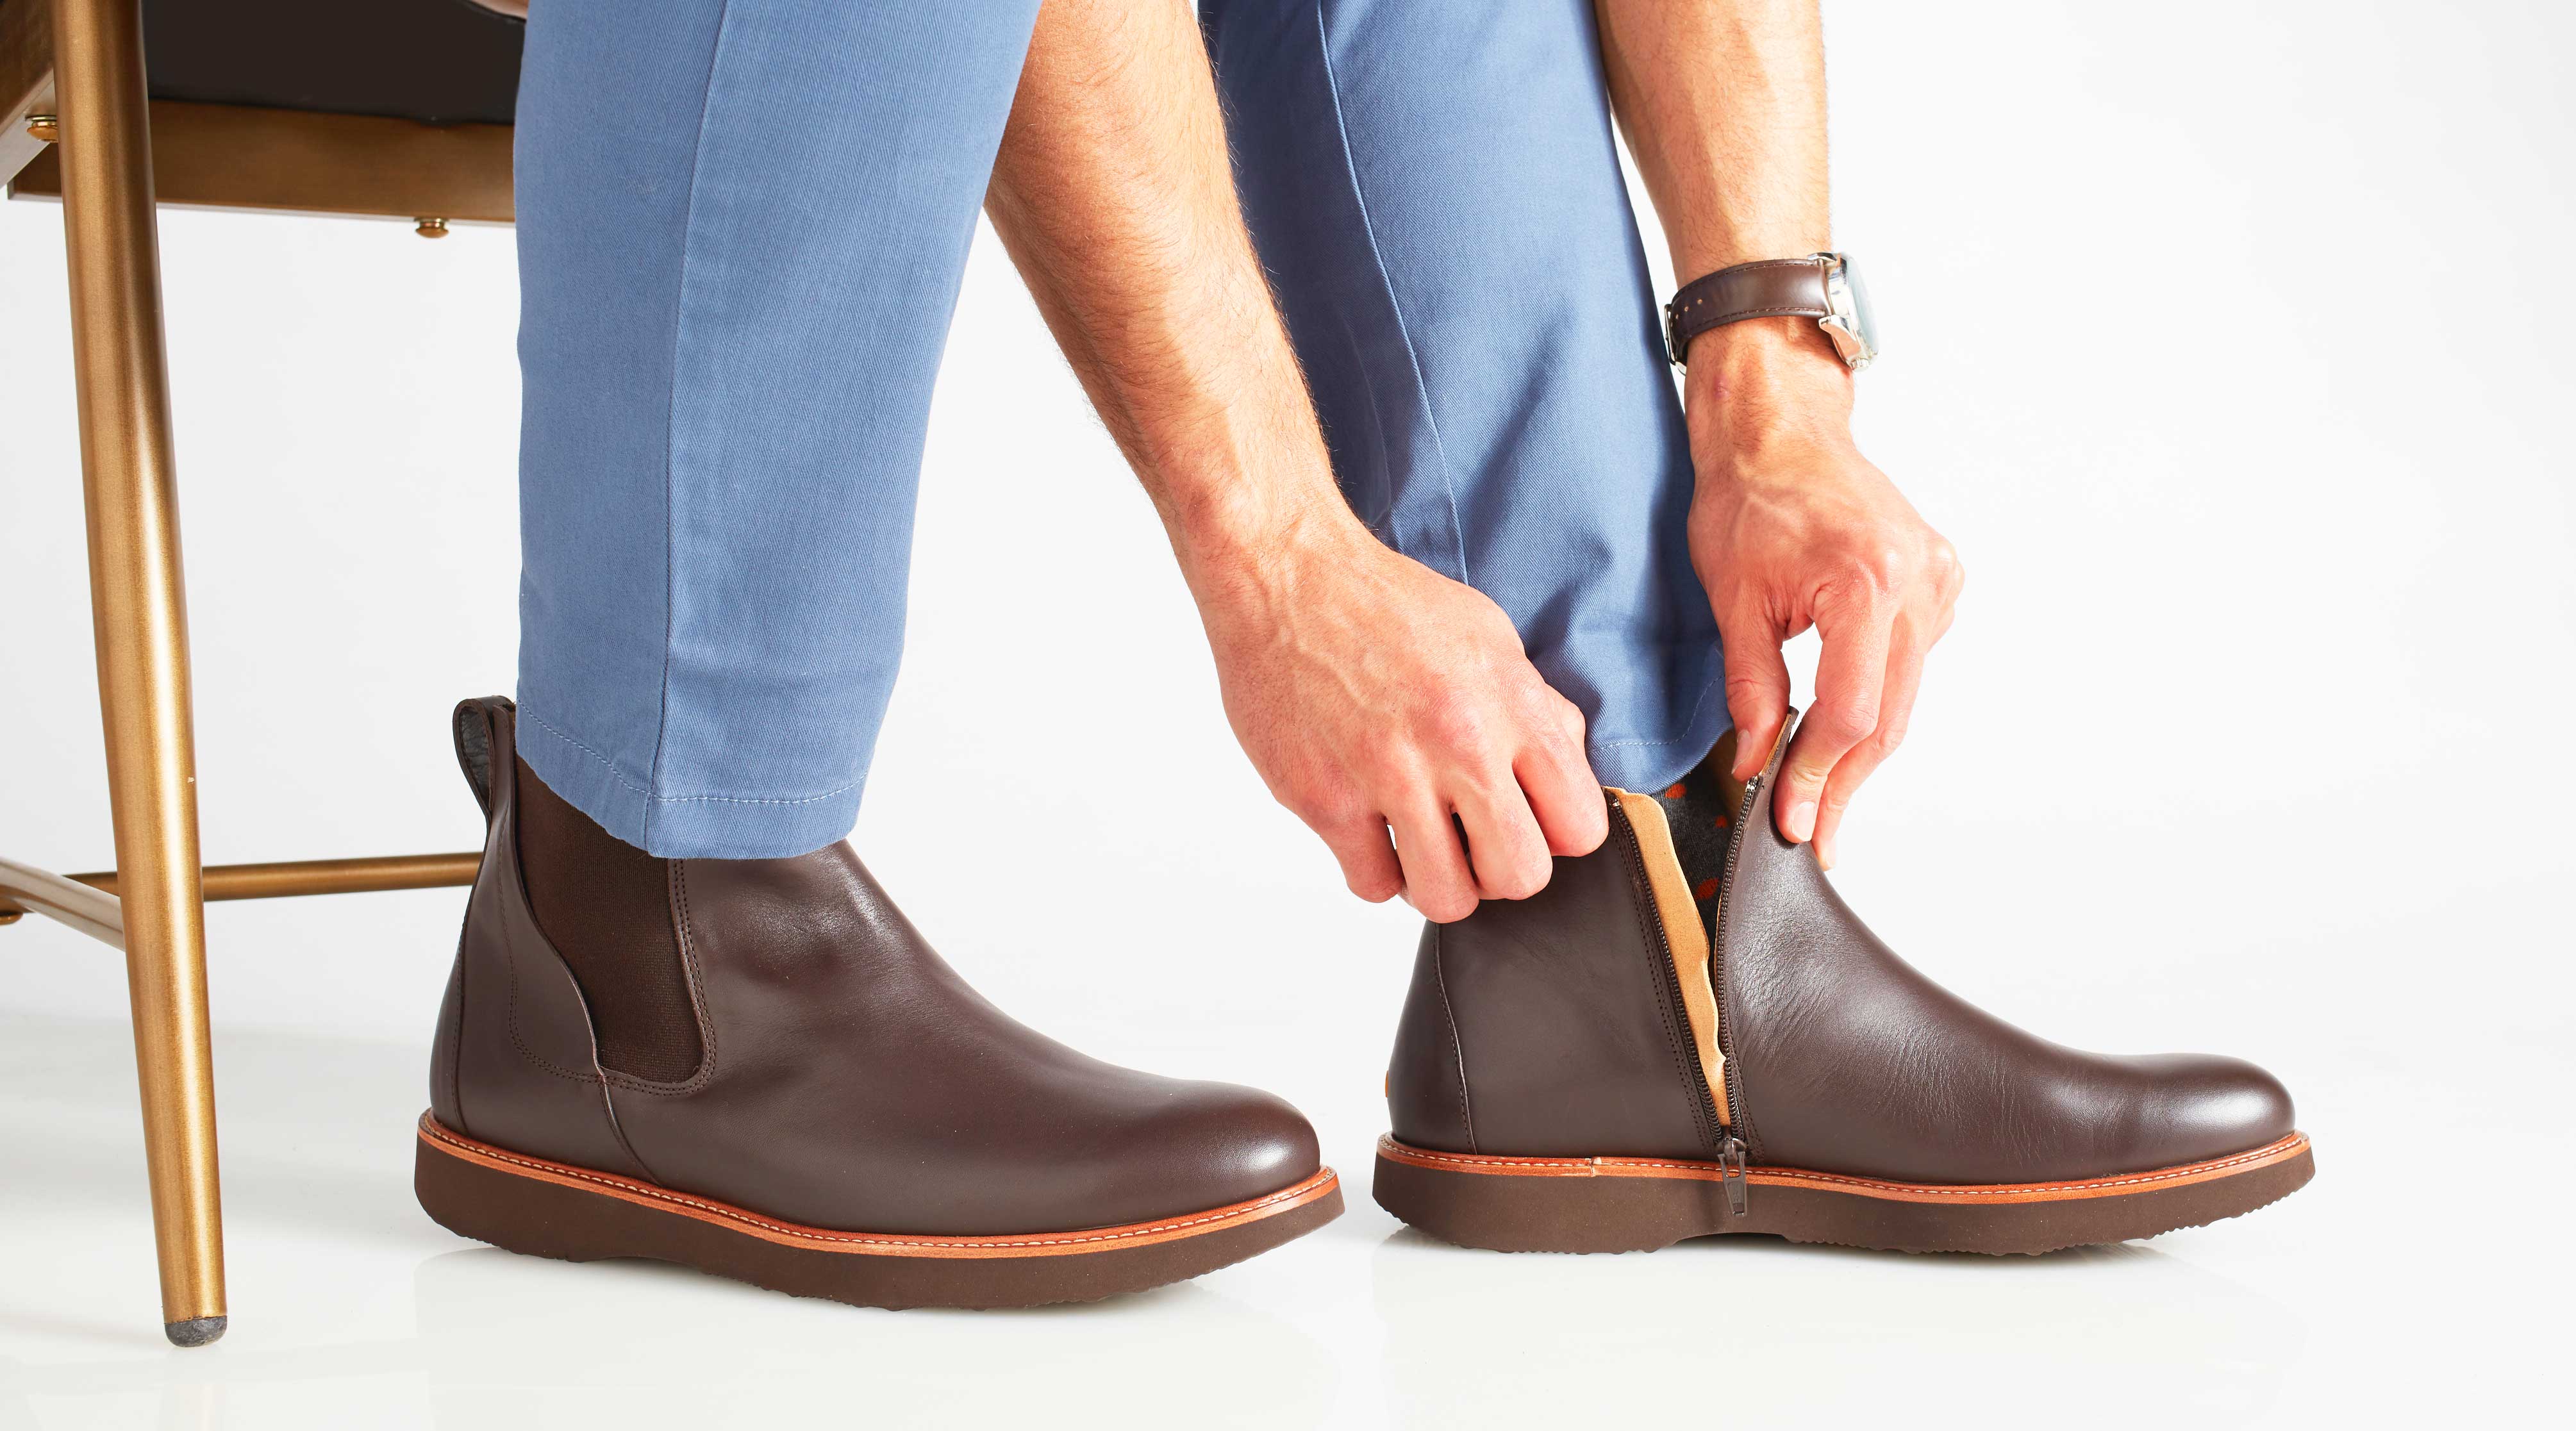 Semi-Formal Shoes That Every Man Should Own: Walk This Way